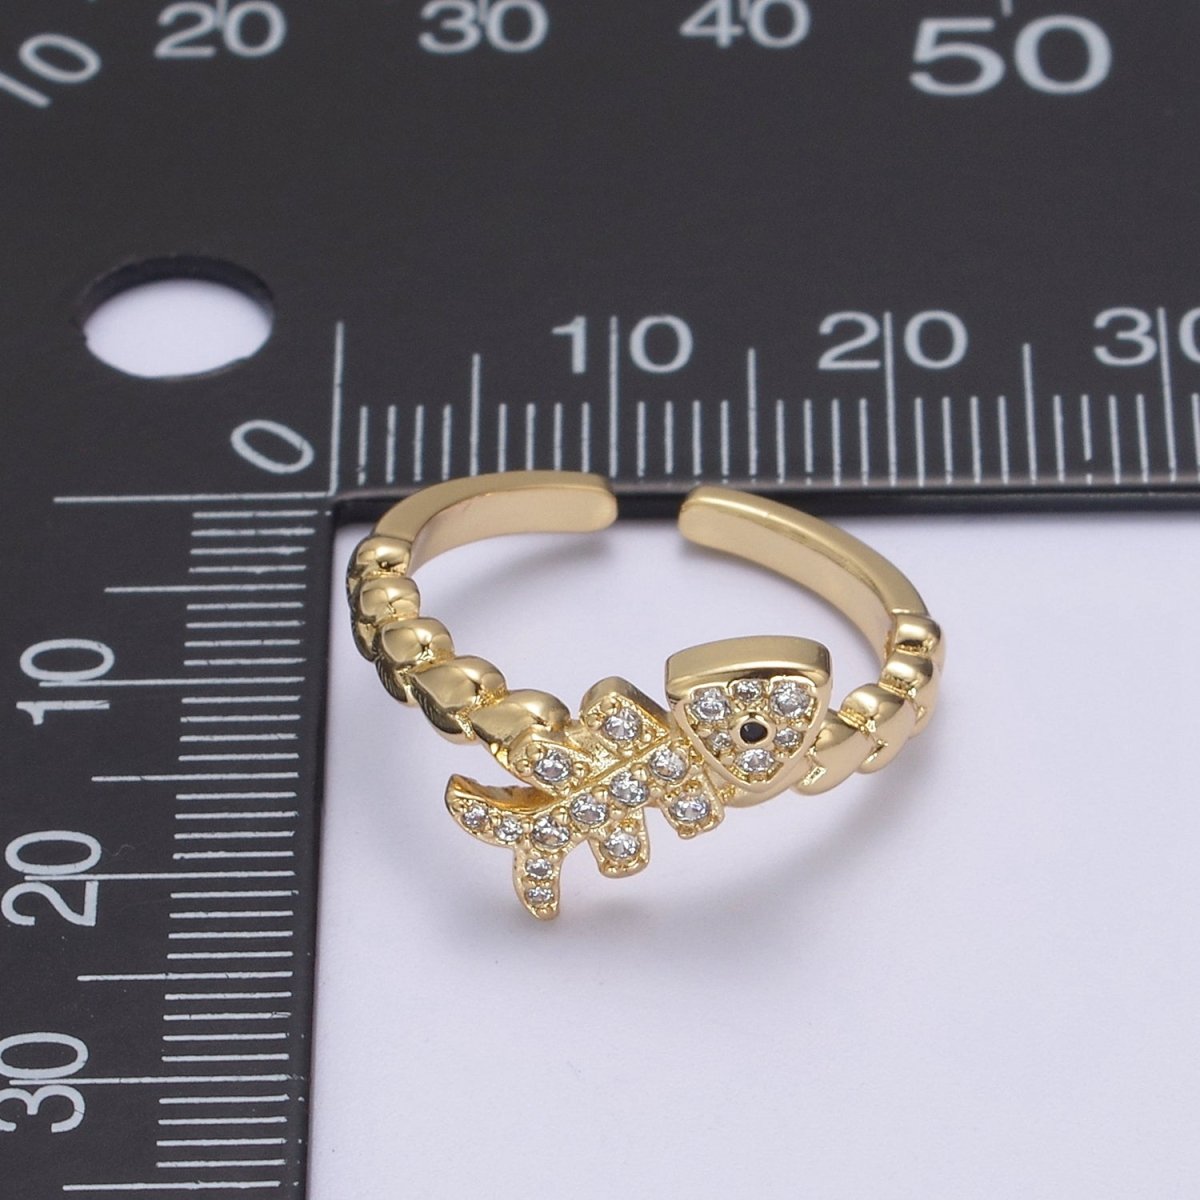 Micro Pave Fish Bone Ring, Heart Textured Gold Adjustable Band Ring, 24K Gold Filled Nature Ocean Wildlife Under The Sea Ring U-438 - DLUXCA